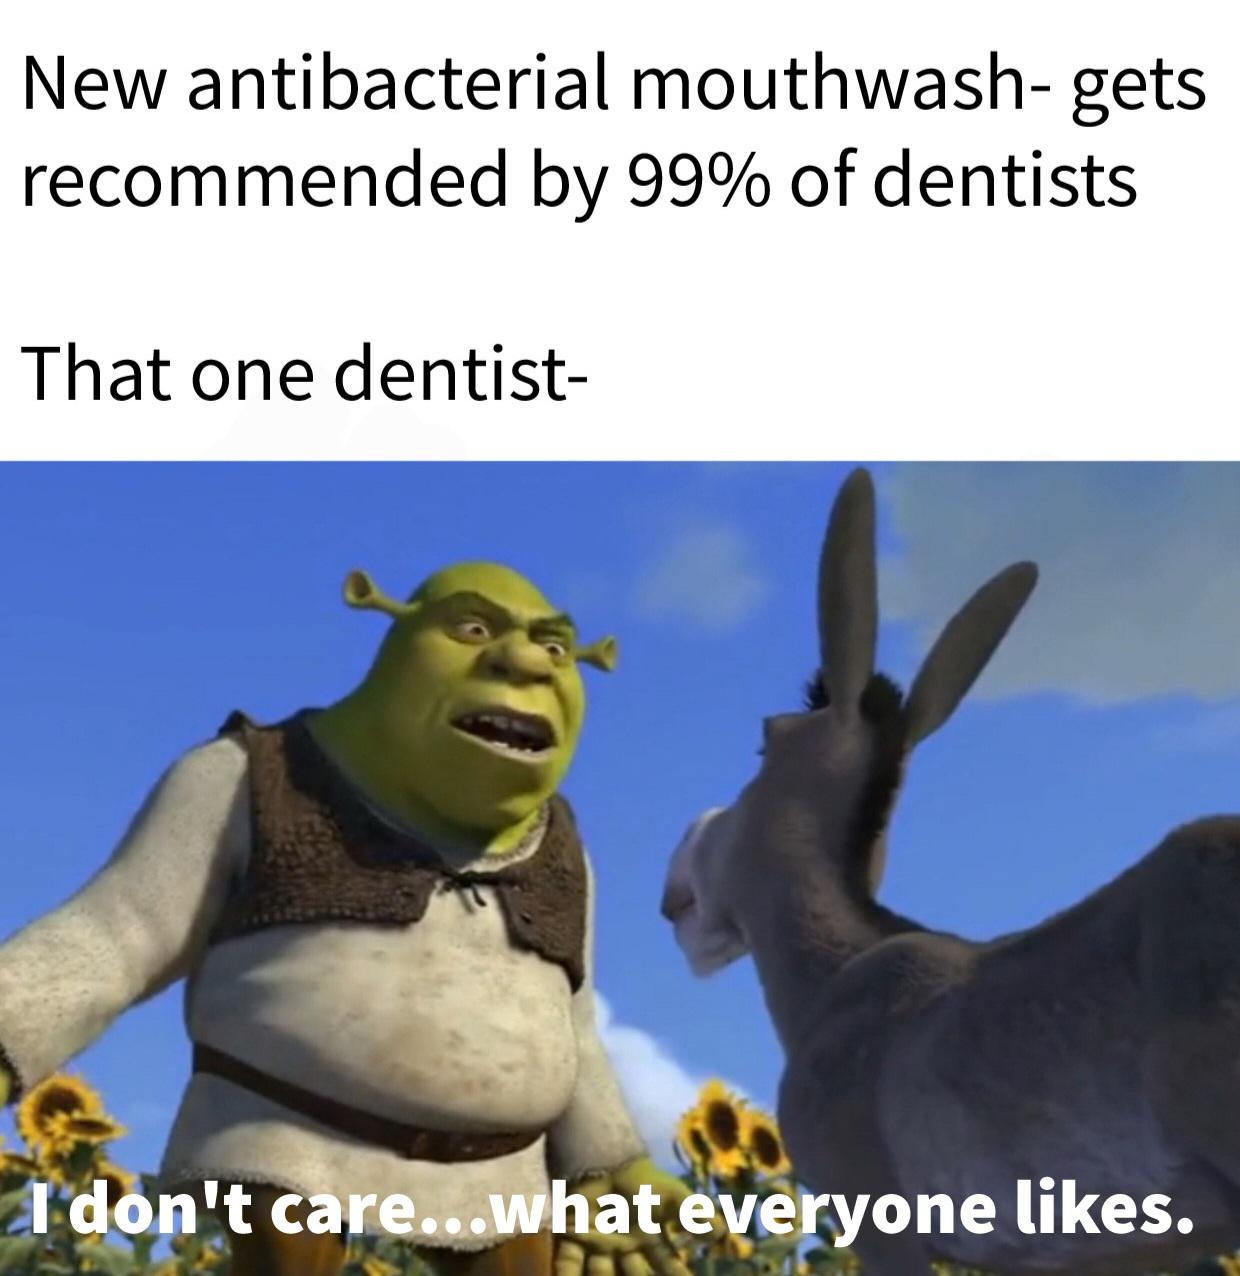 dank memes - everyone like shrek - New antibacterial mouthwash gets recommended by 99% of dentists That one dentist I don't care...what everyone .